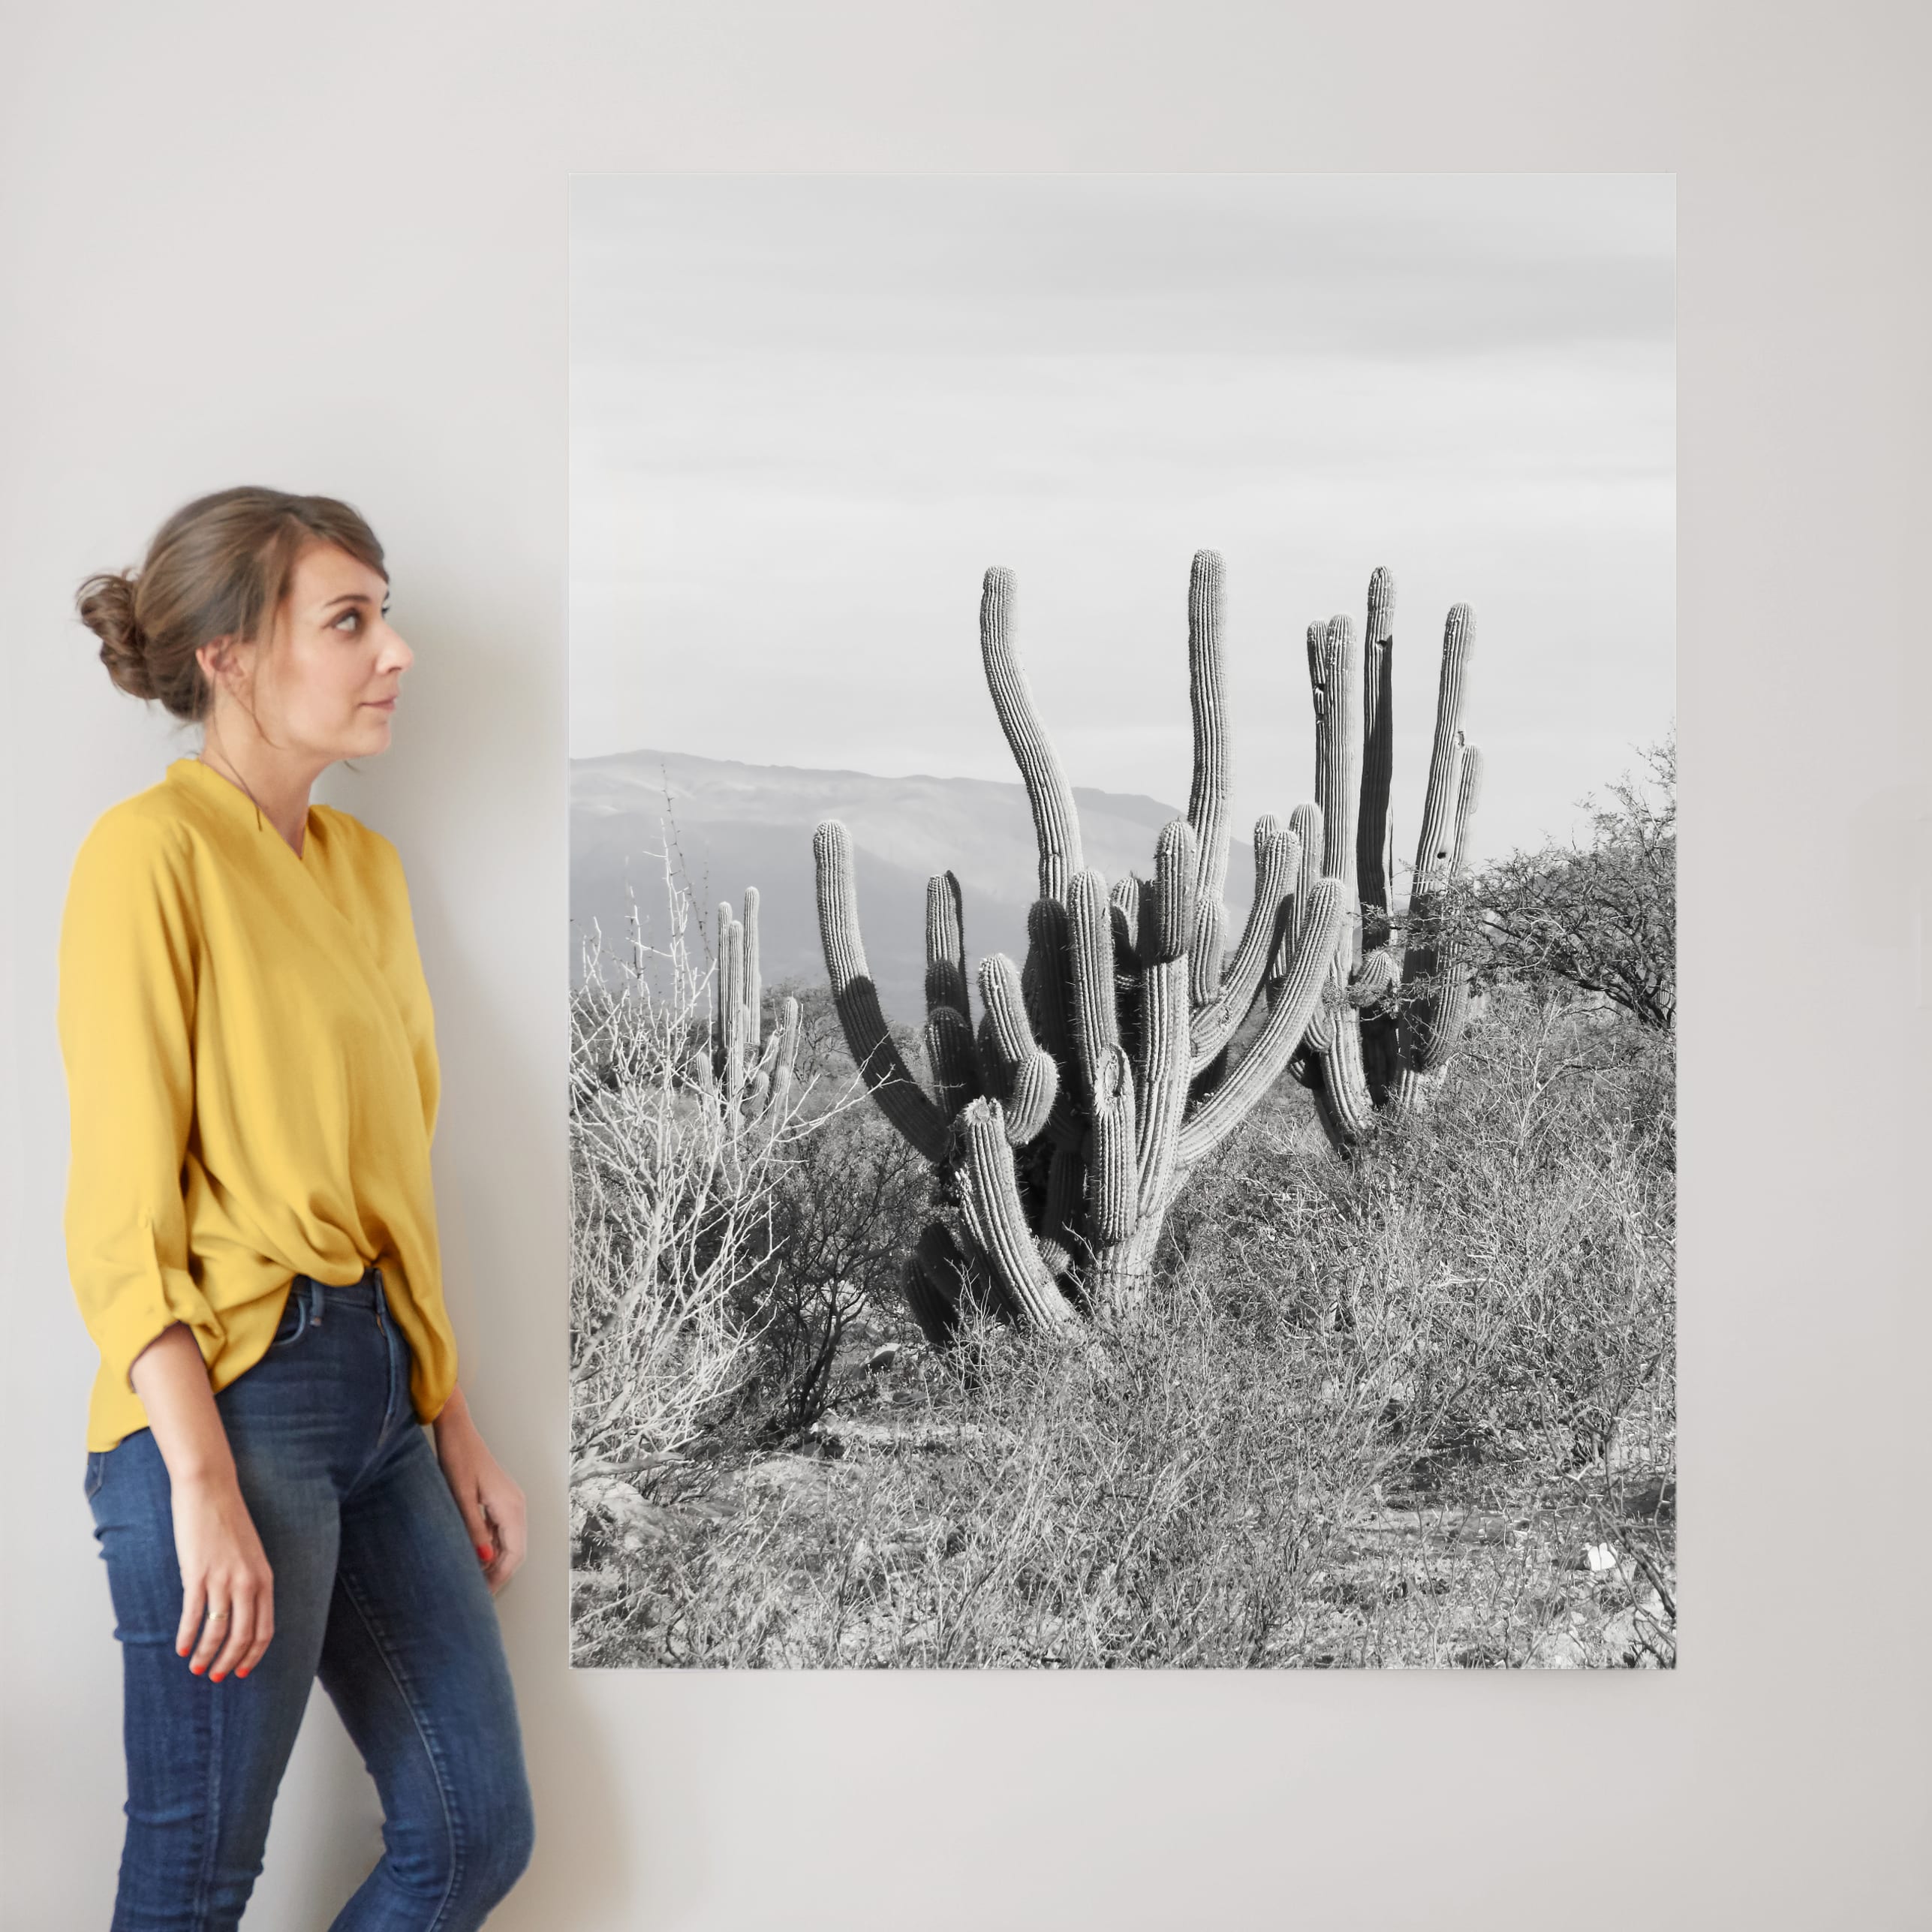 Strong-willed Wall Art Prints by Eliane Lamb | Minted